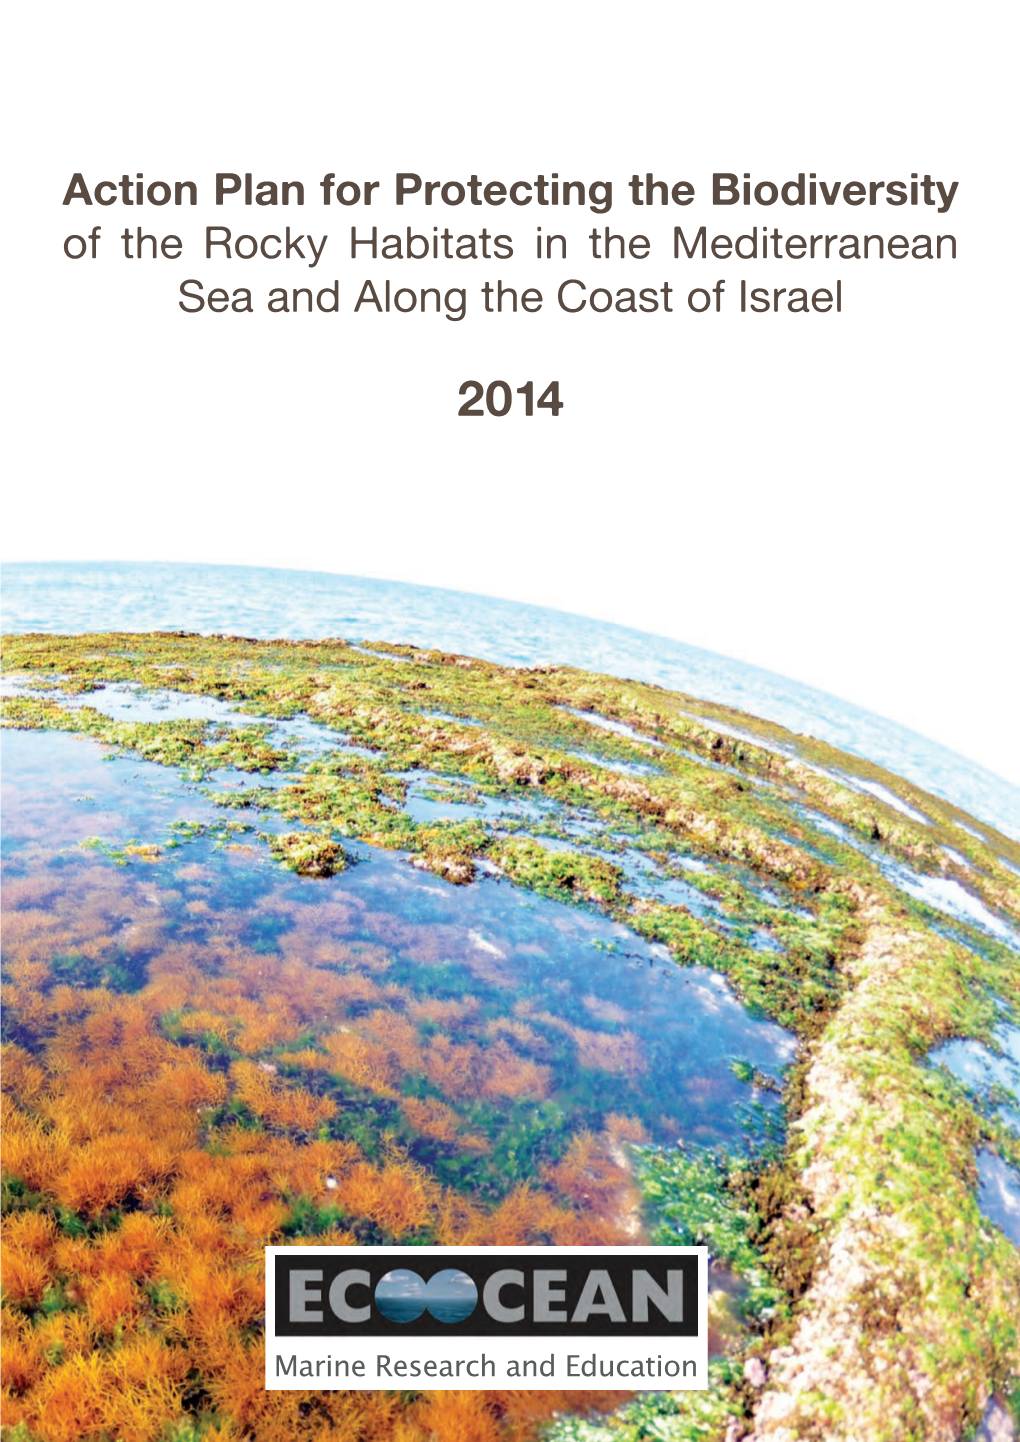 Action Plan for Protecting the Biodiversity of the Rocky Habitats in the Mediterranean Sea and Along the Coast of Israel